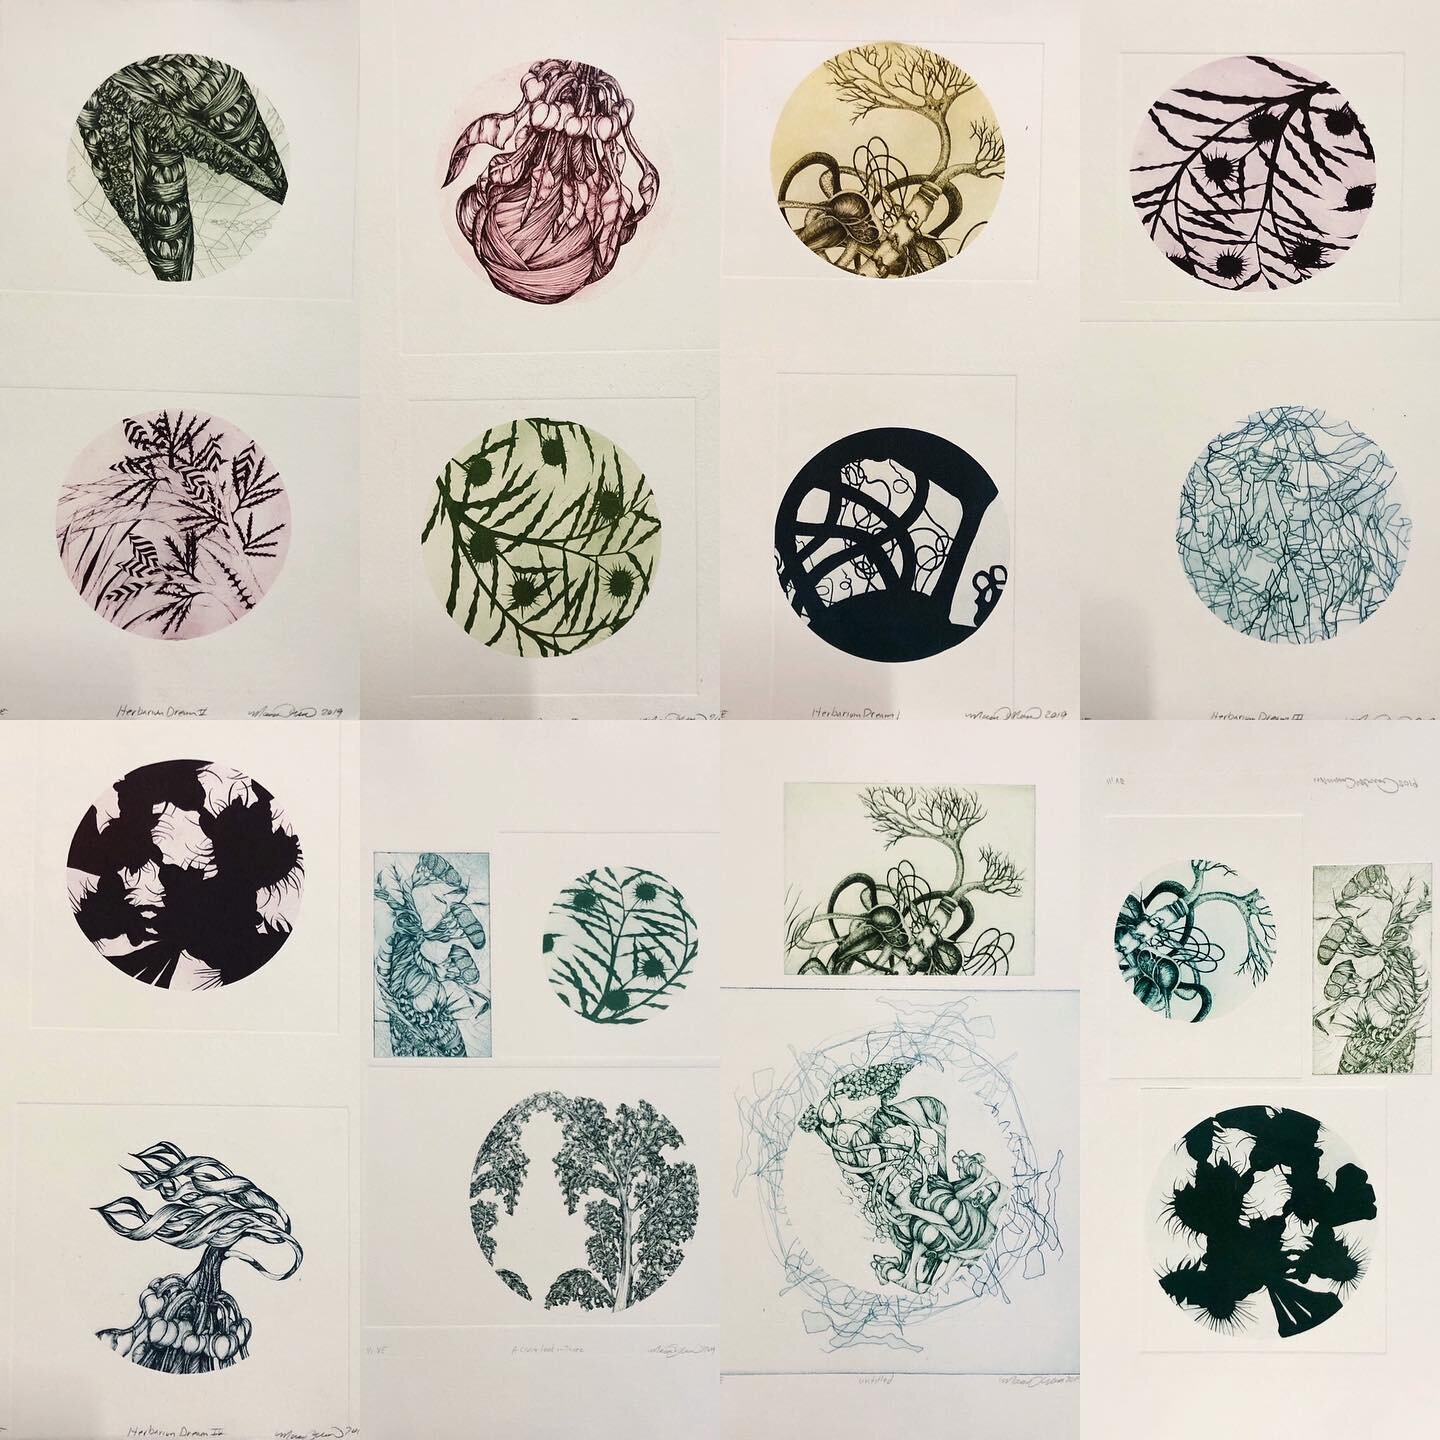 &iexcl;Peep! ....selection of current small prints from A Closer Look series 👁🔍🔬 .
.
.
#printmaking #plantblindness #somaflora #photopolymer #intaglio #drawing #pairings #specimen #anthropoceneart #herbariuminspired #smallworks #contemporaryprintm